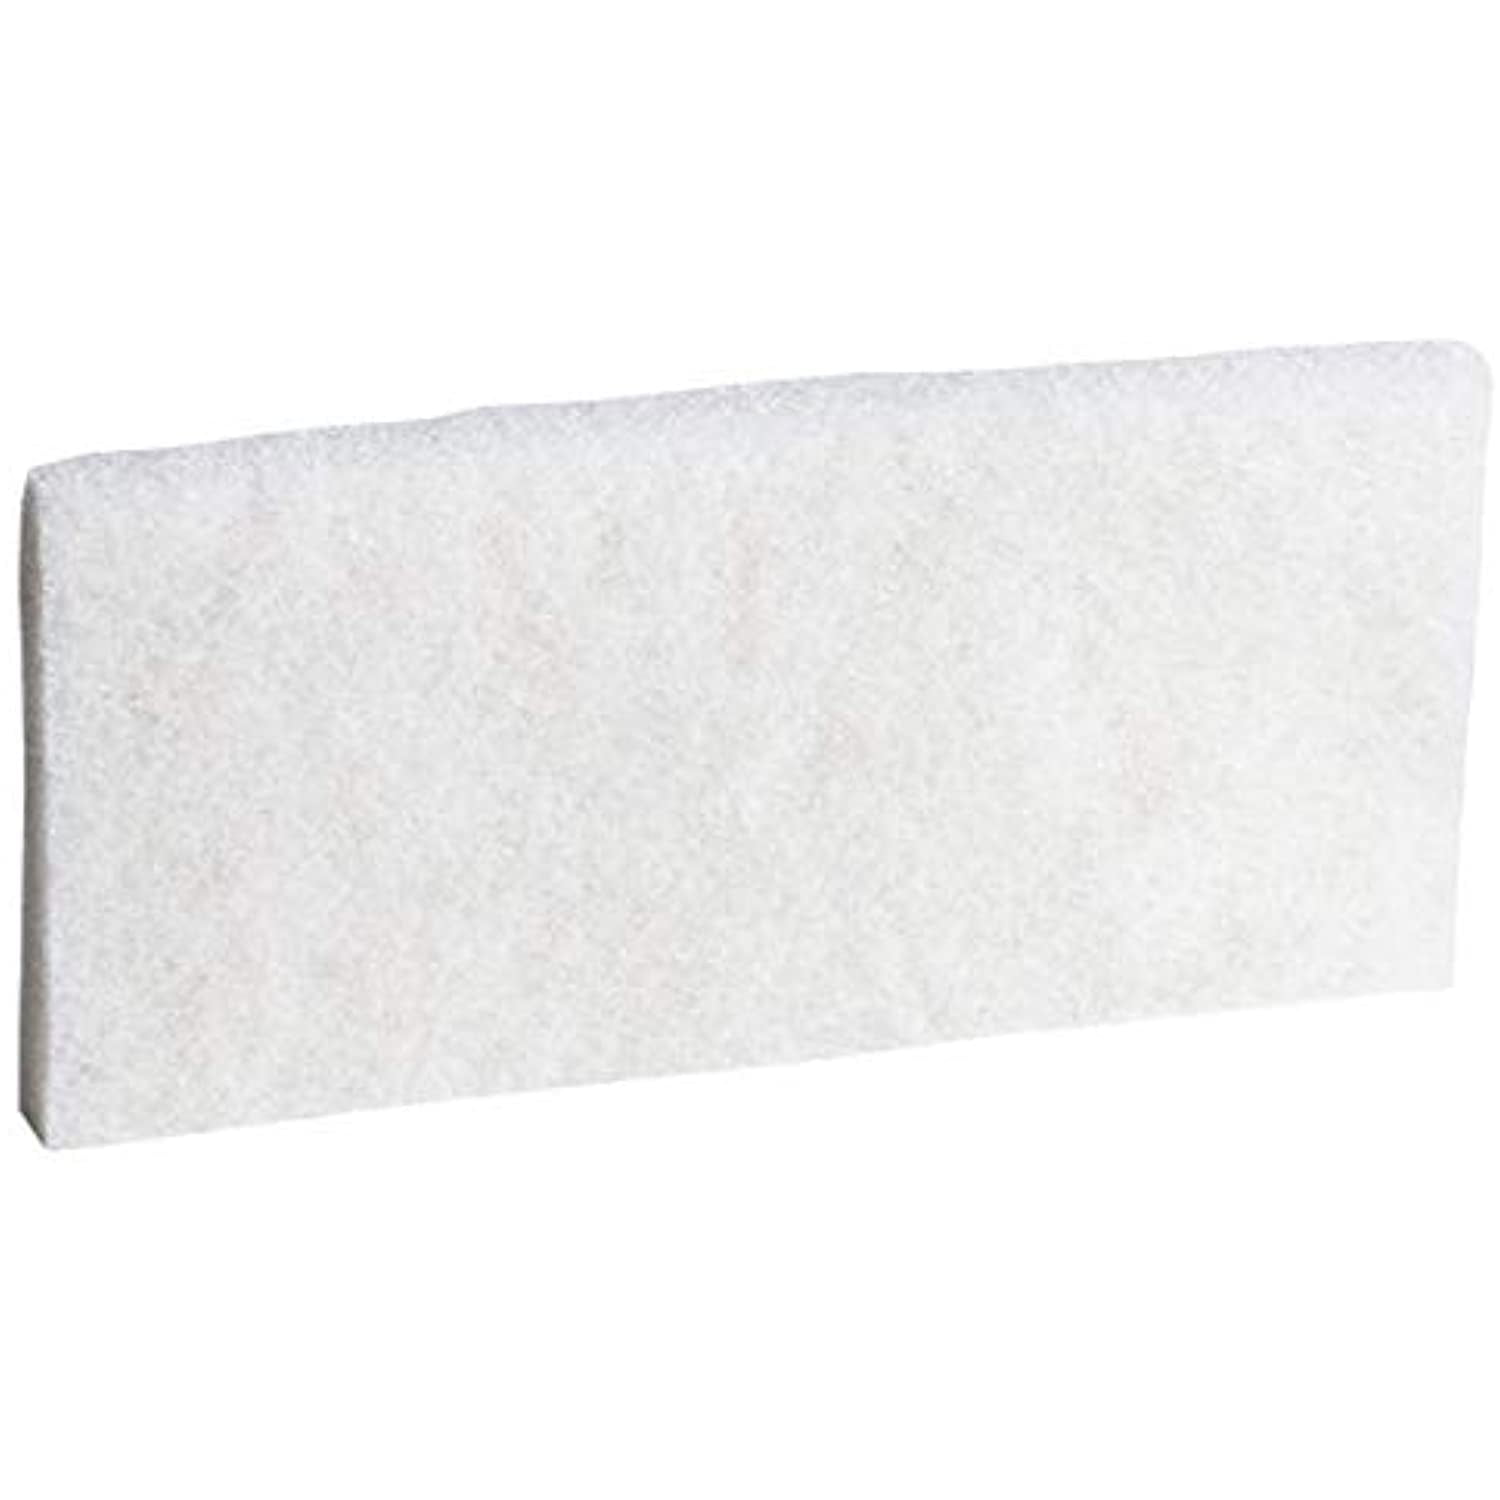 ONE PAD ONE PADS WHITE DOODLEBUG 5" x 10" WHITE CLEANSING SCRUBBING PADS 3M 